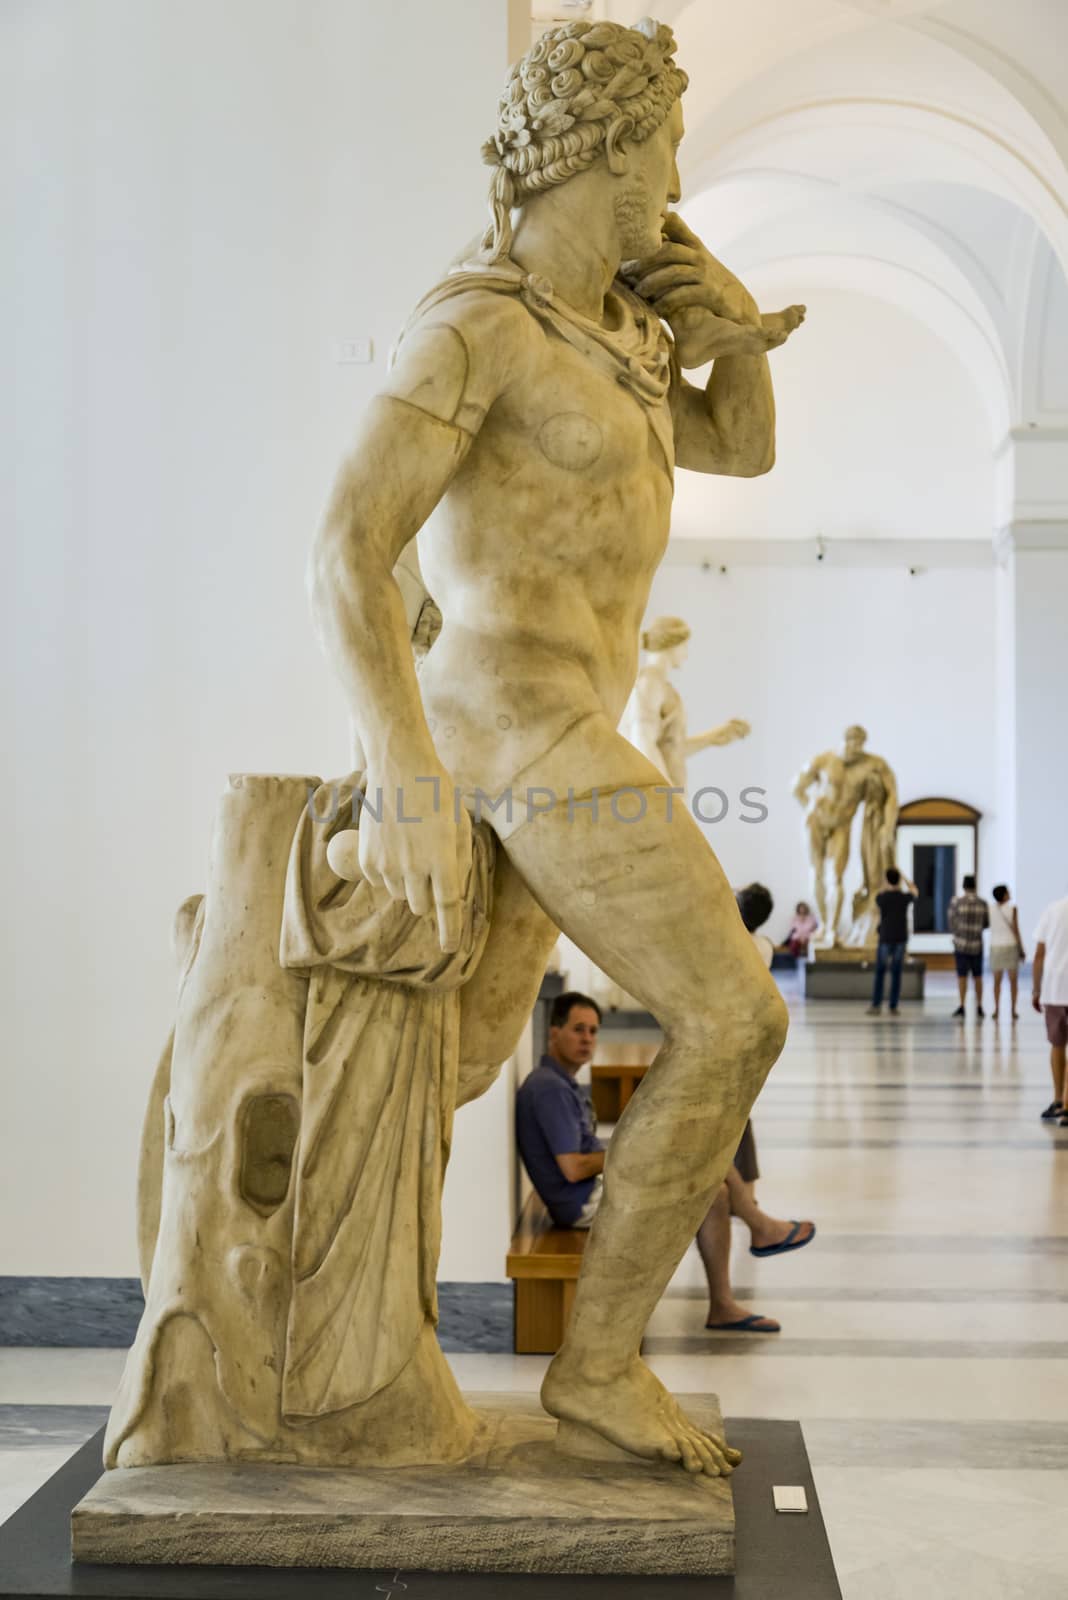 Bronze statue in Naples National Archaeological Museum. by edella